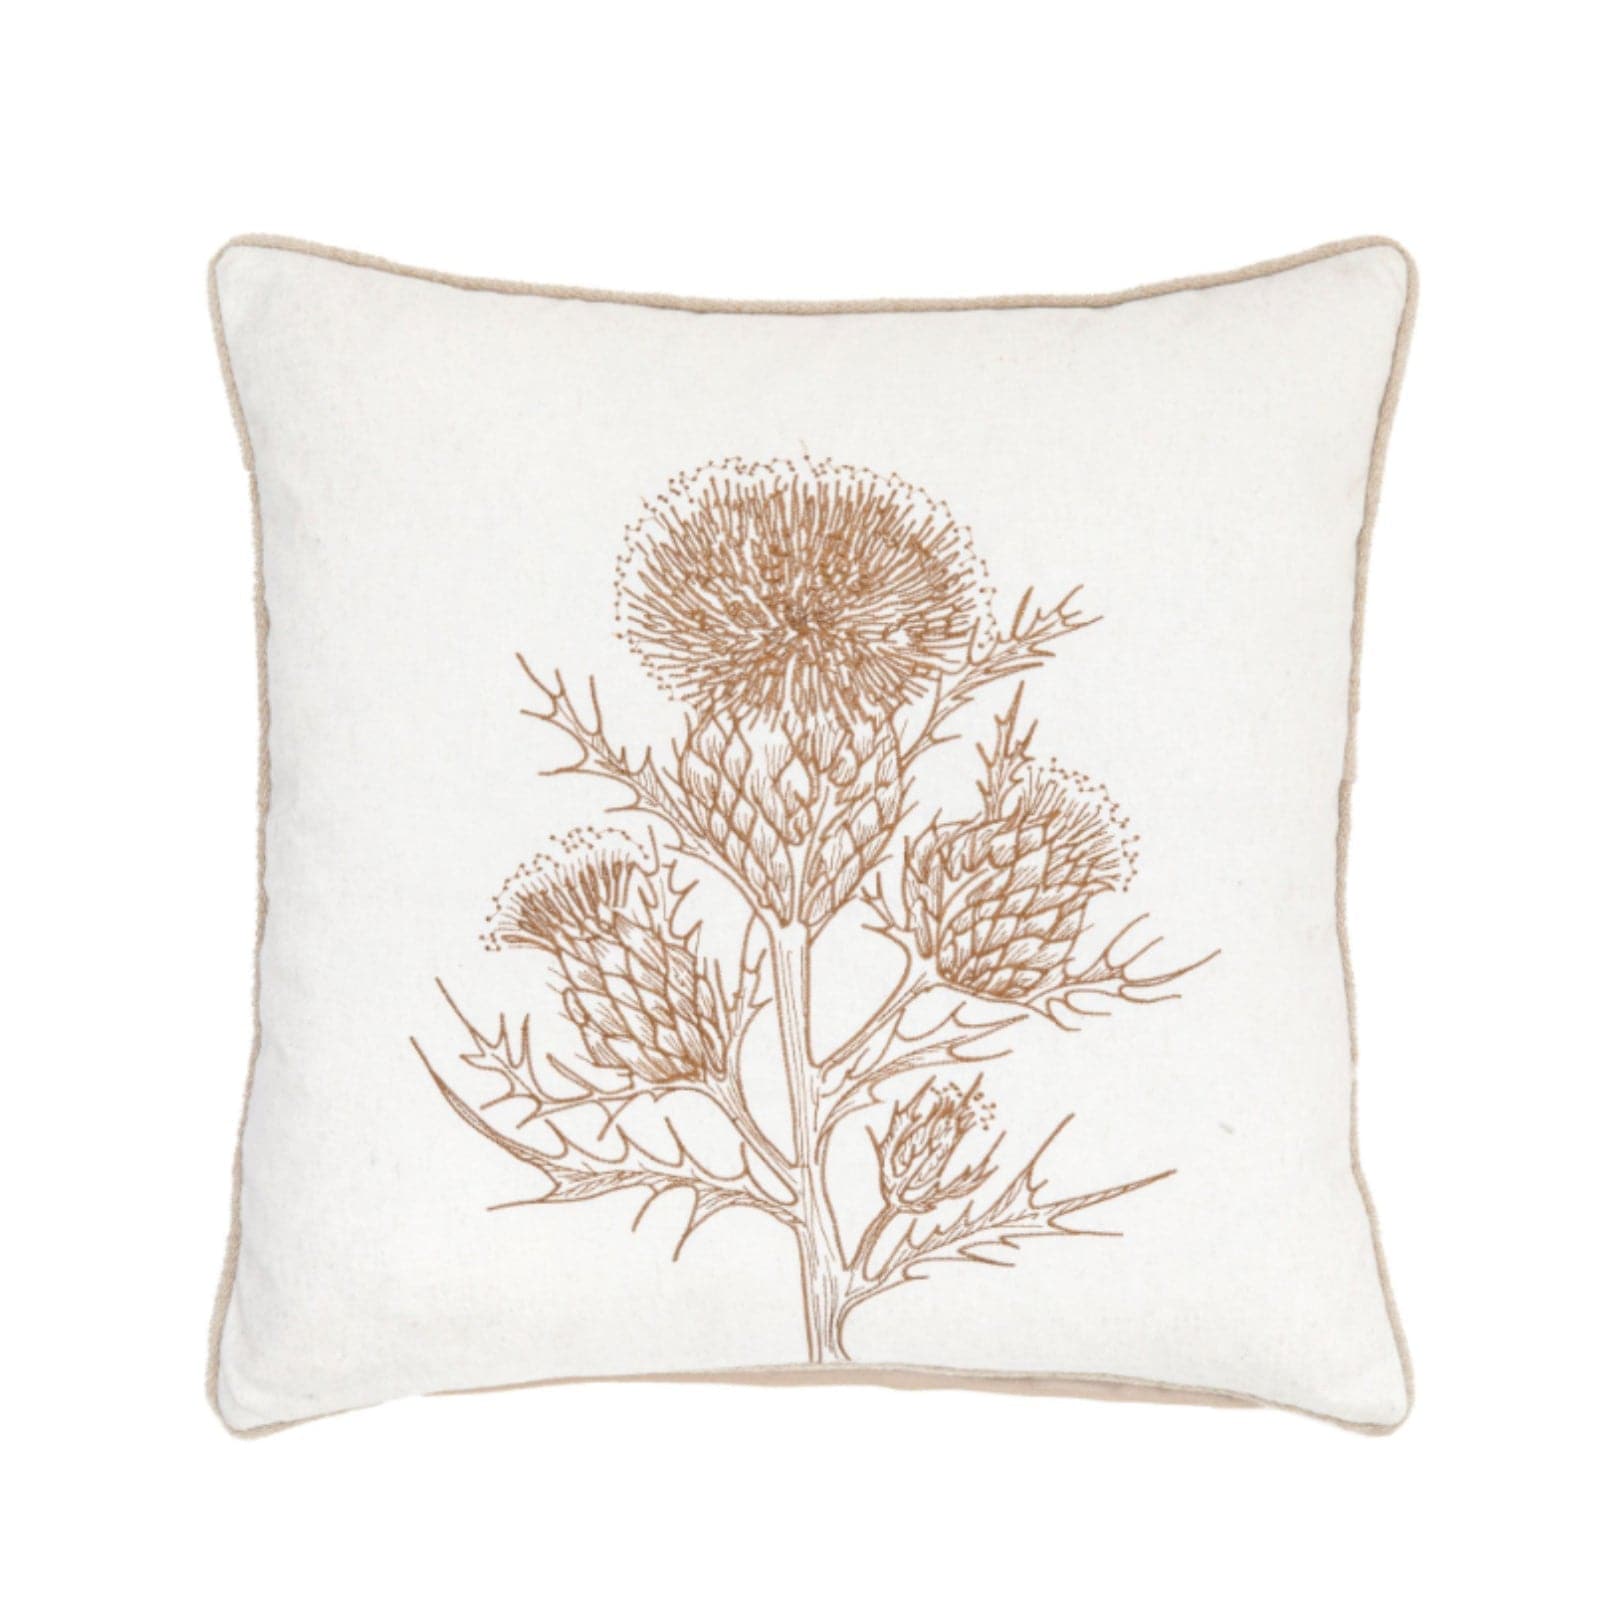 Embroidered Thistle Cushion Cover - The Farthing